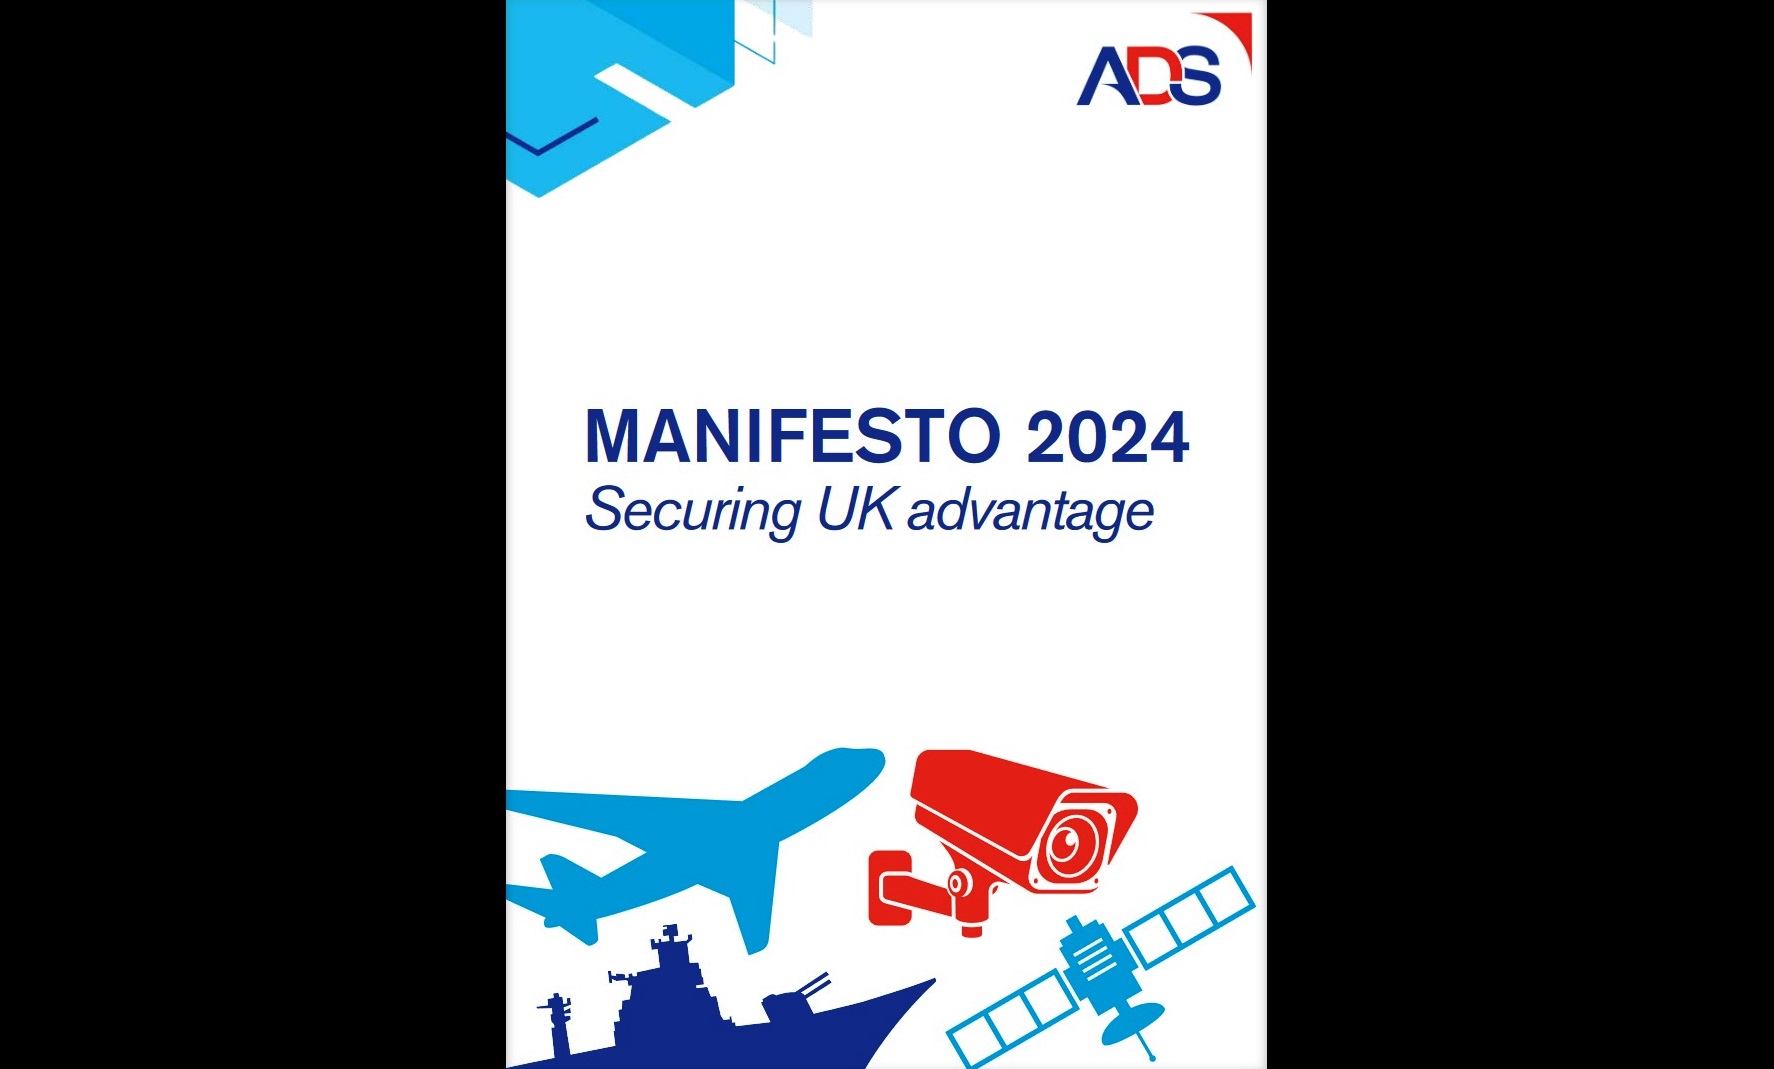 ADS launches its 2024 Manifesto